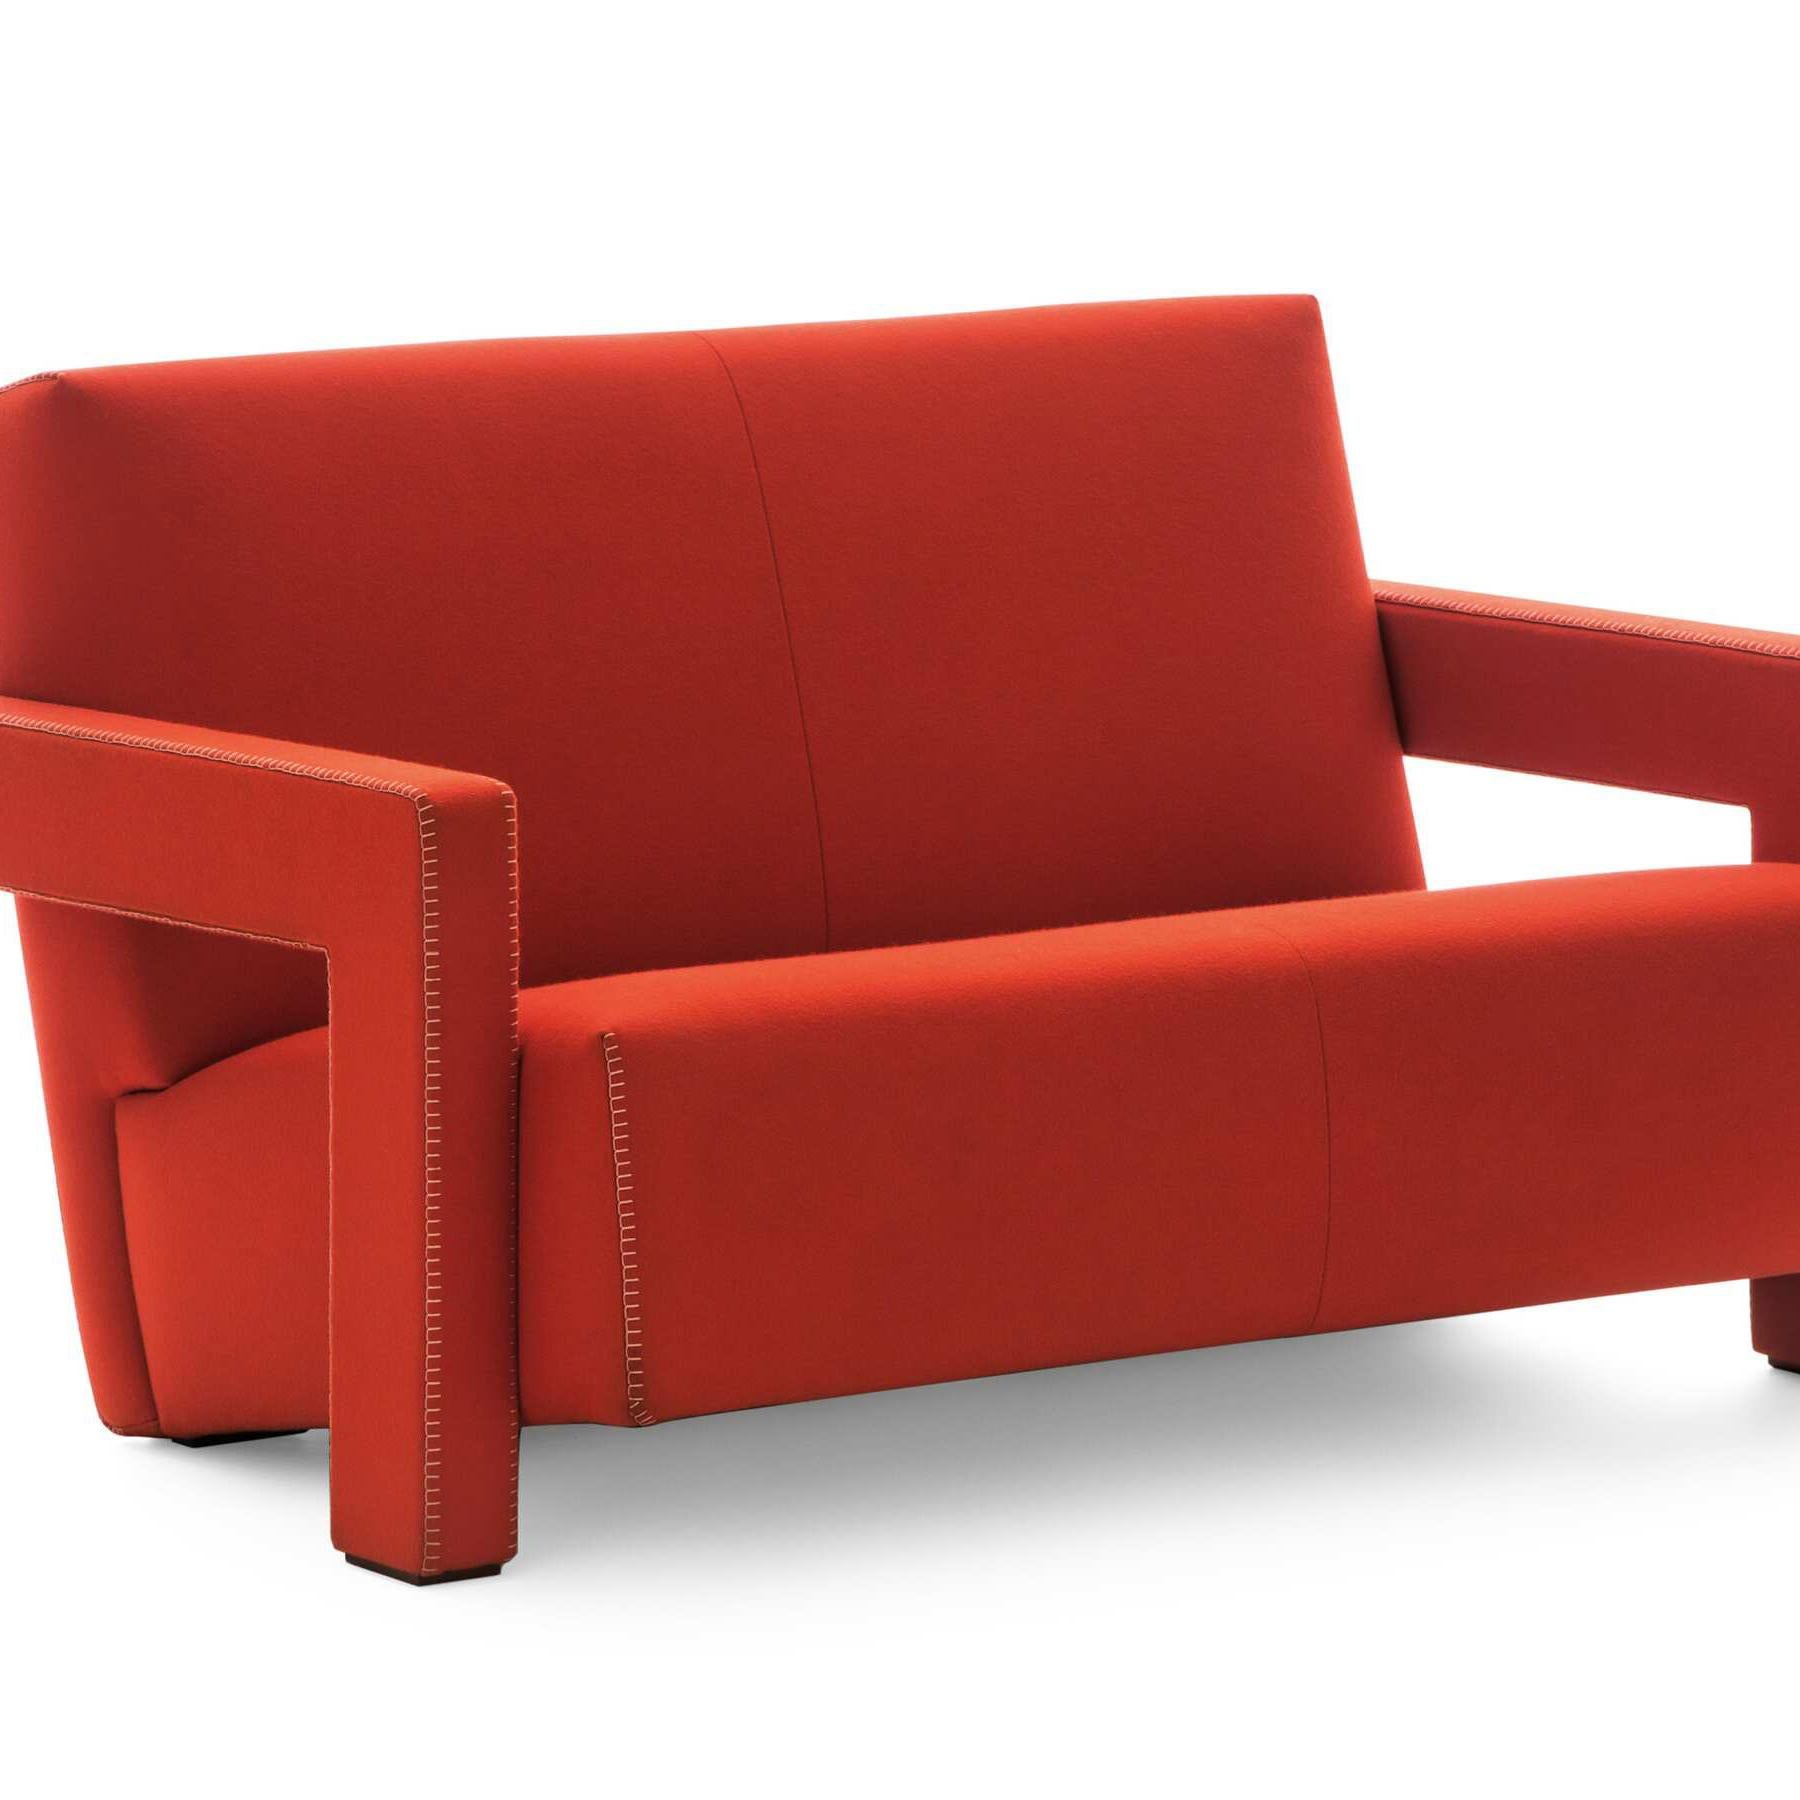 Italian Gerrit Thomas Rietveld Red Wide Utrech Armchair by Cassina For Sale